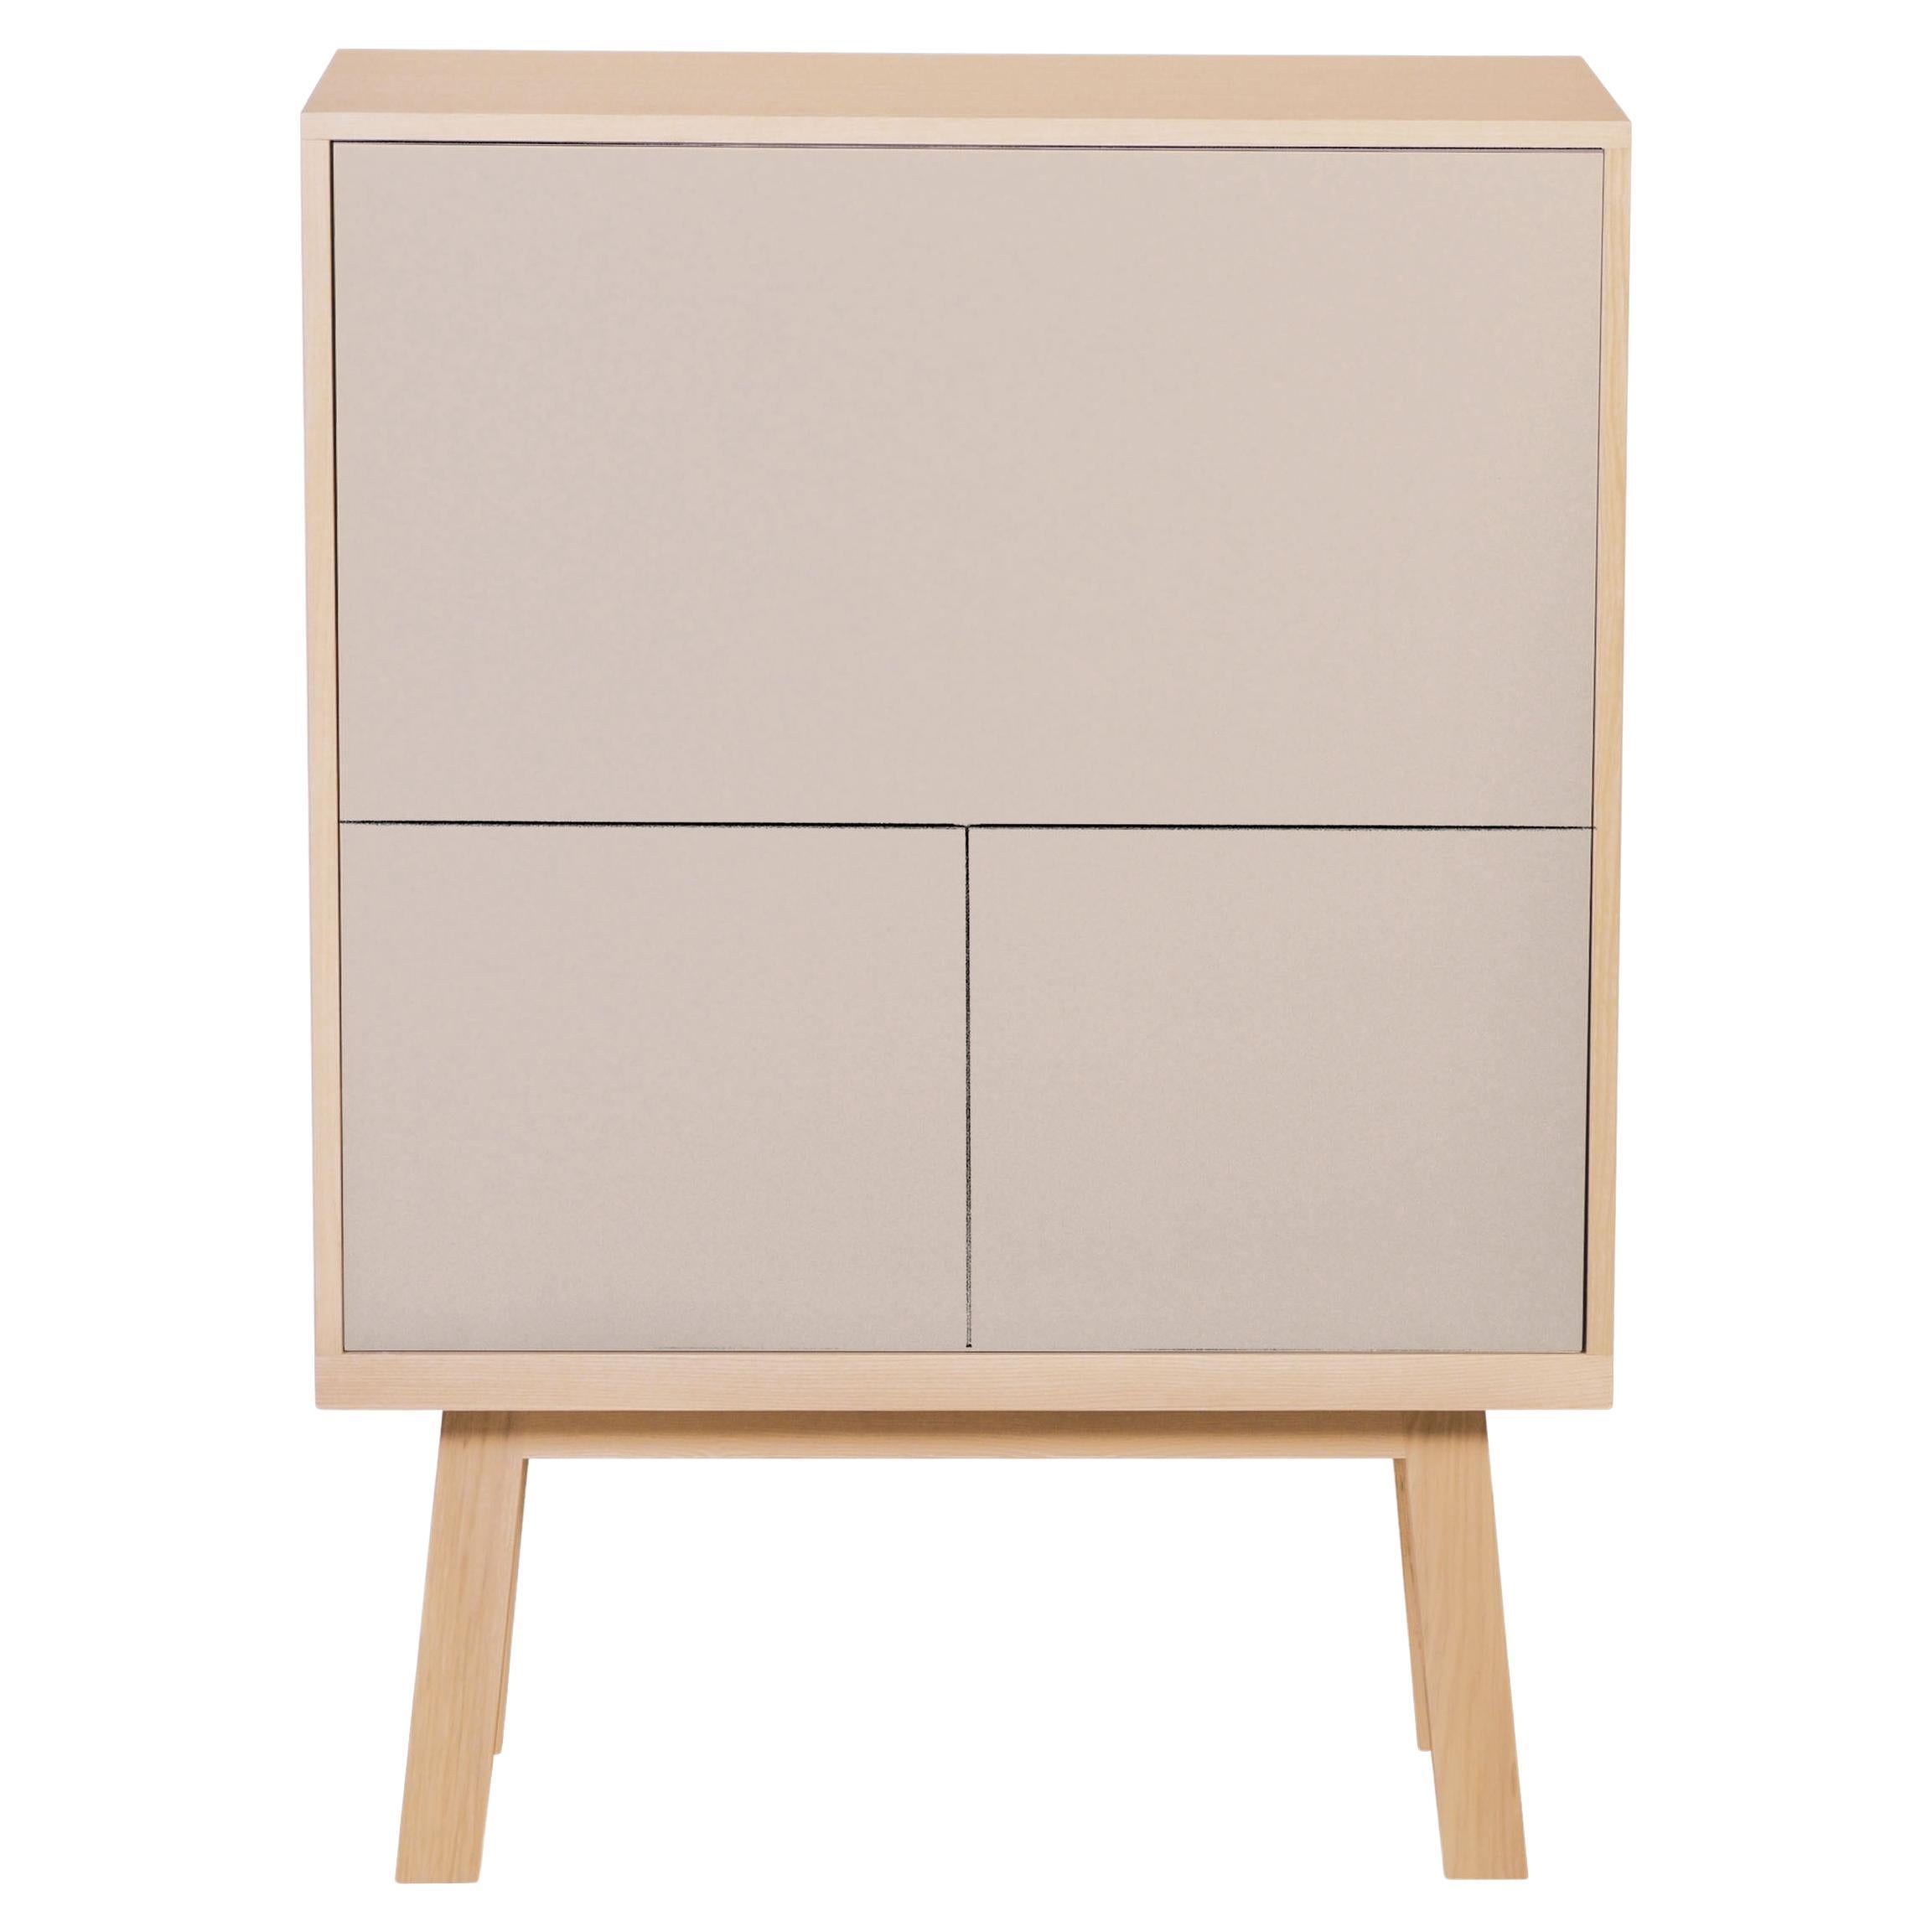 Light Grey design secretaire desk in Ash, 11 colours and 2 widths are available